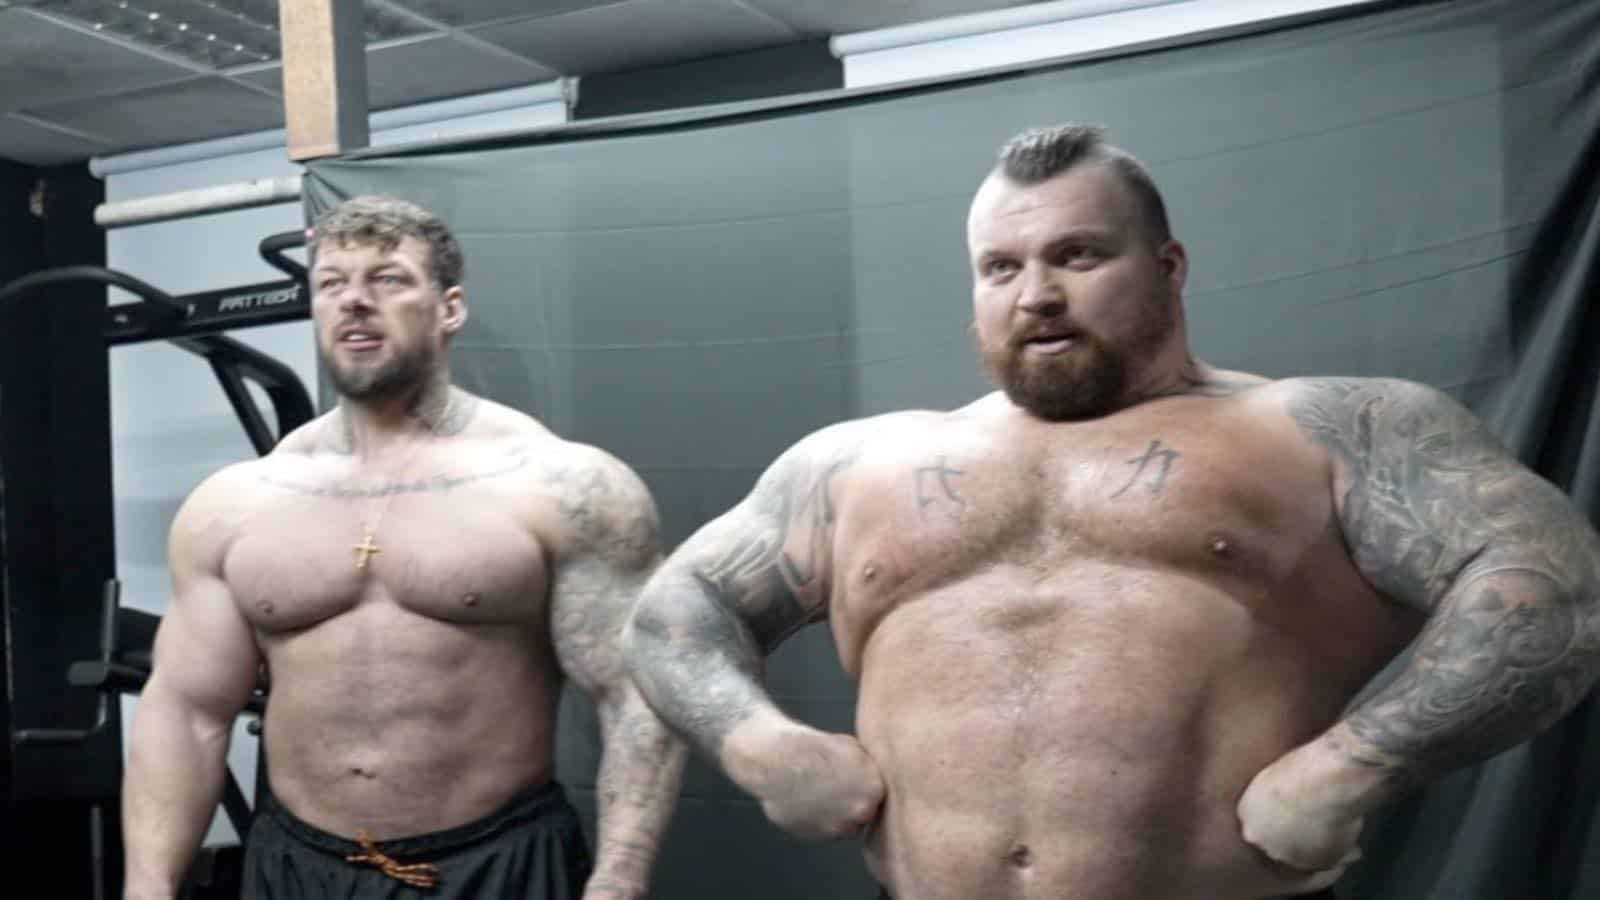 eddie-hall-preps-for-bodybuilding-debut-by-training-his-back-with-a-pro-–-breaking-muscle